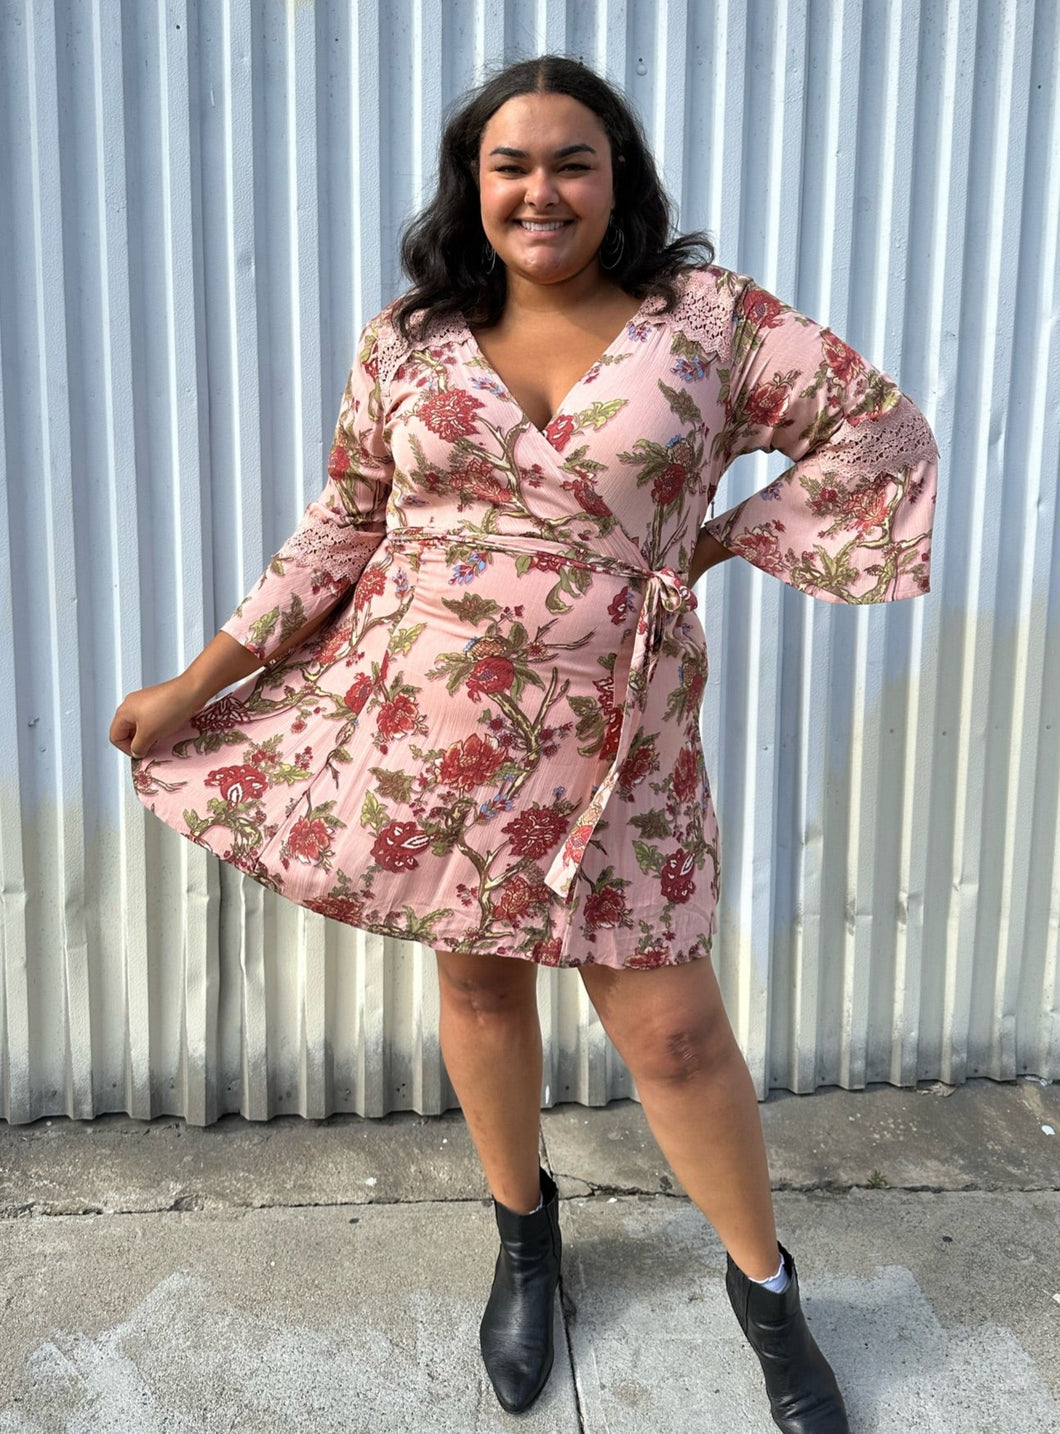 Full-body front view of a size 18 City Chic pale pink wrap dress with red and green florals, lace details, and bell sleeves styled with black boots on a size 18/20 model. The photo is taken outside in natural lighting.